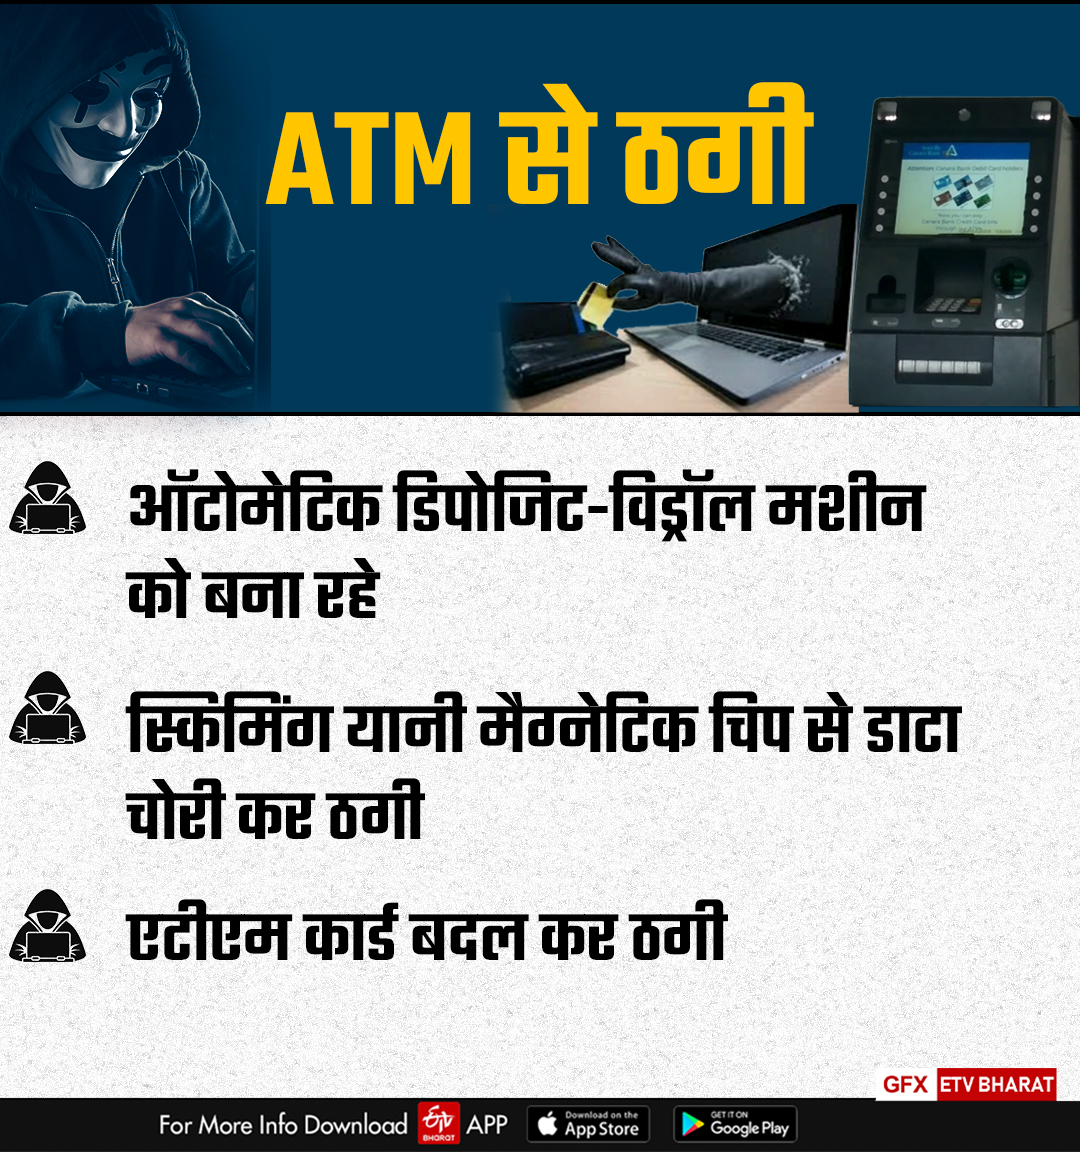 atms-on-target-of-cyber-criminals-in-jharkhand